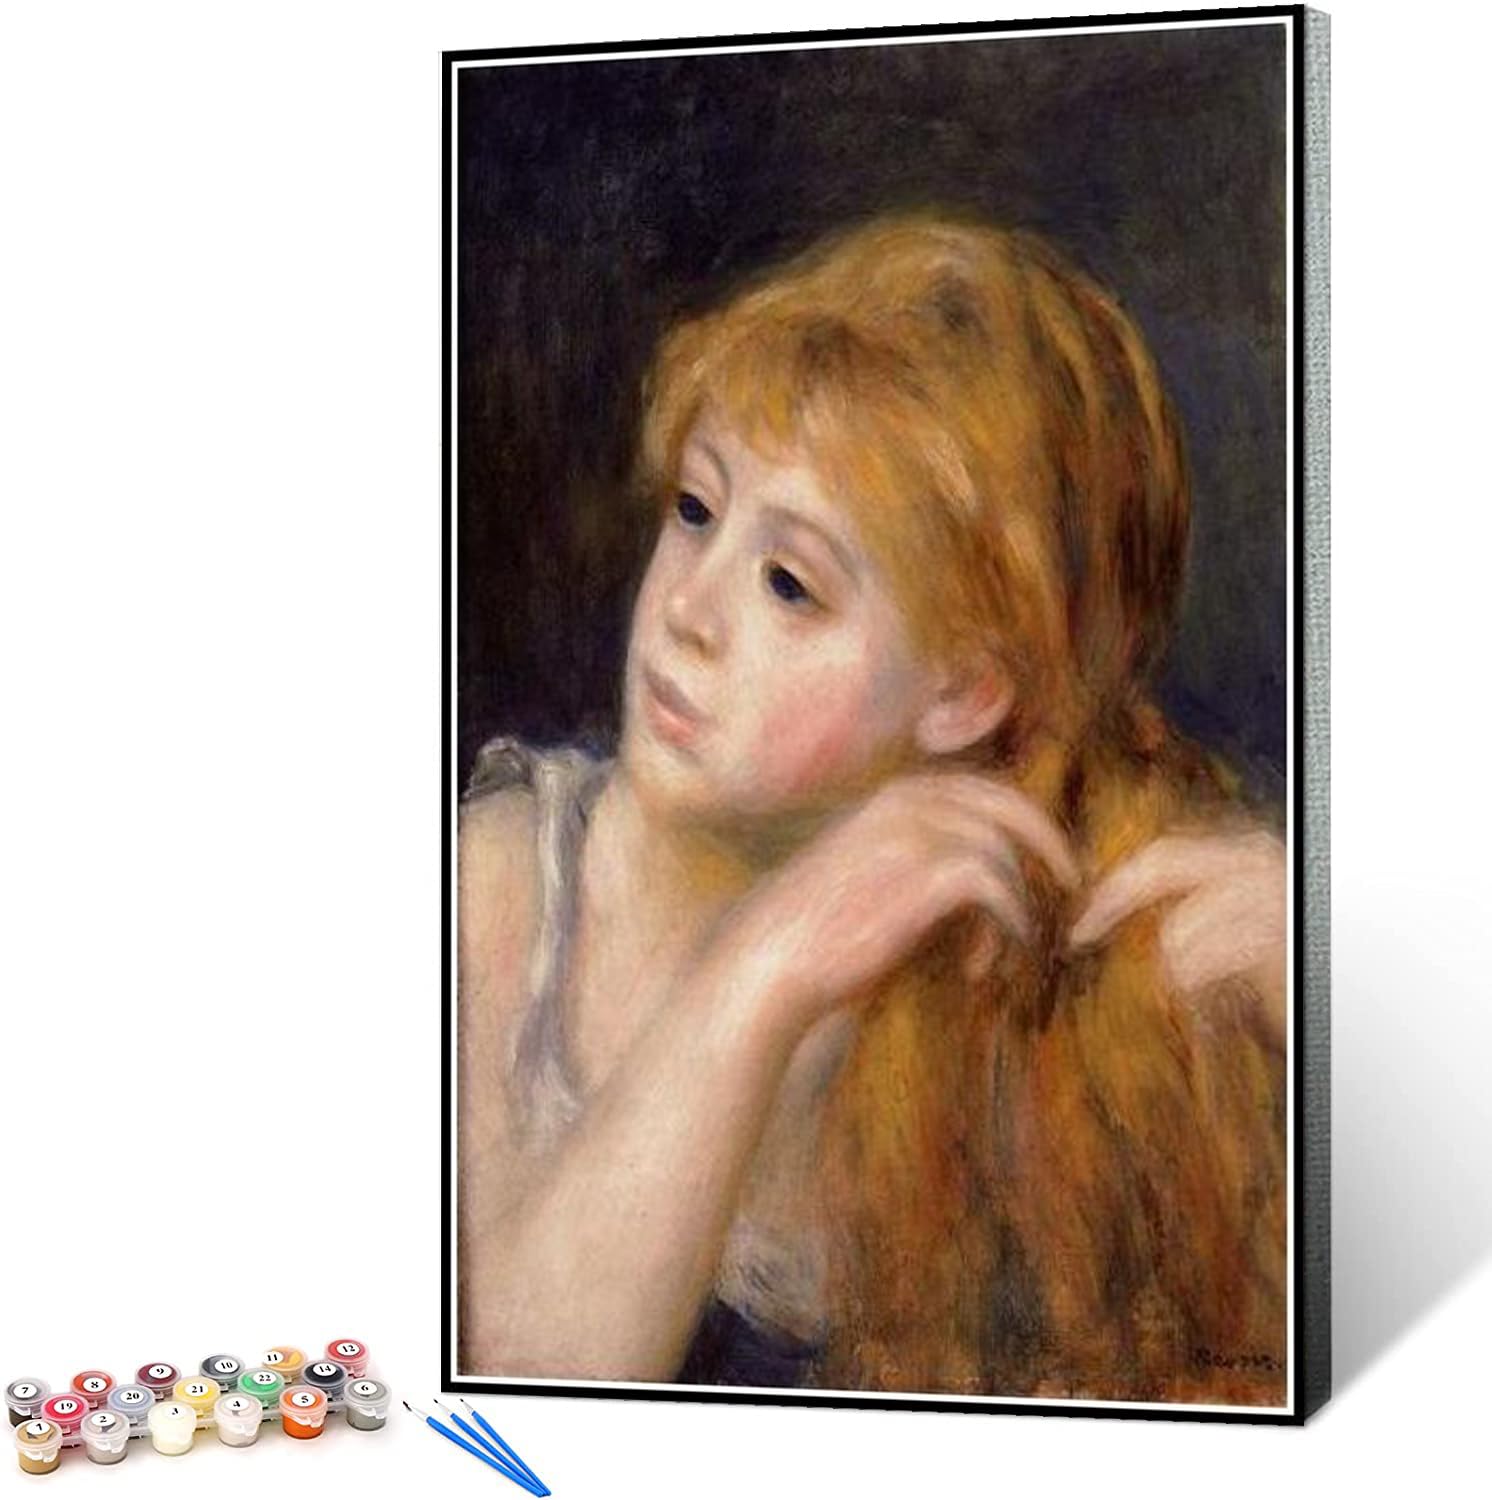 Diy paint by number kits head of a young woman painting by pierre auguste renoir adult coloring book xcm home